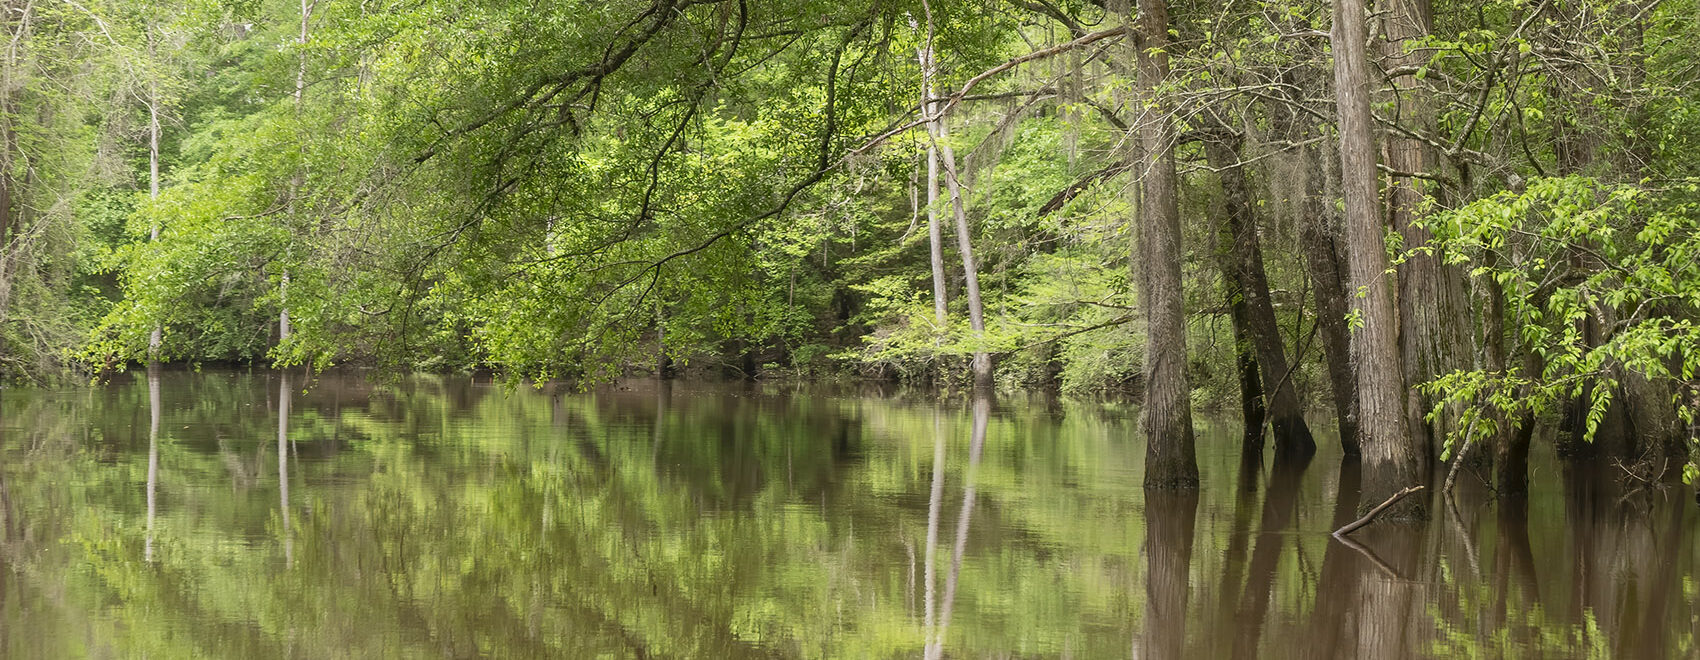 trees hanging over still bayou water and reflections